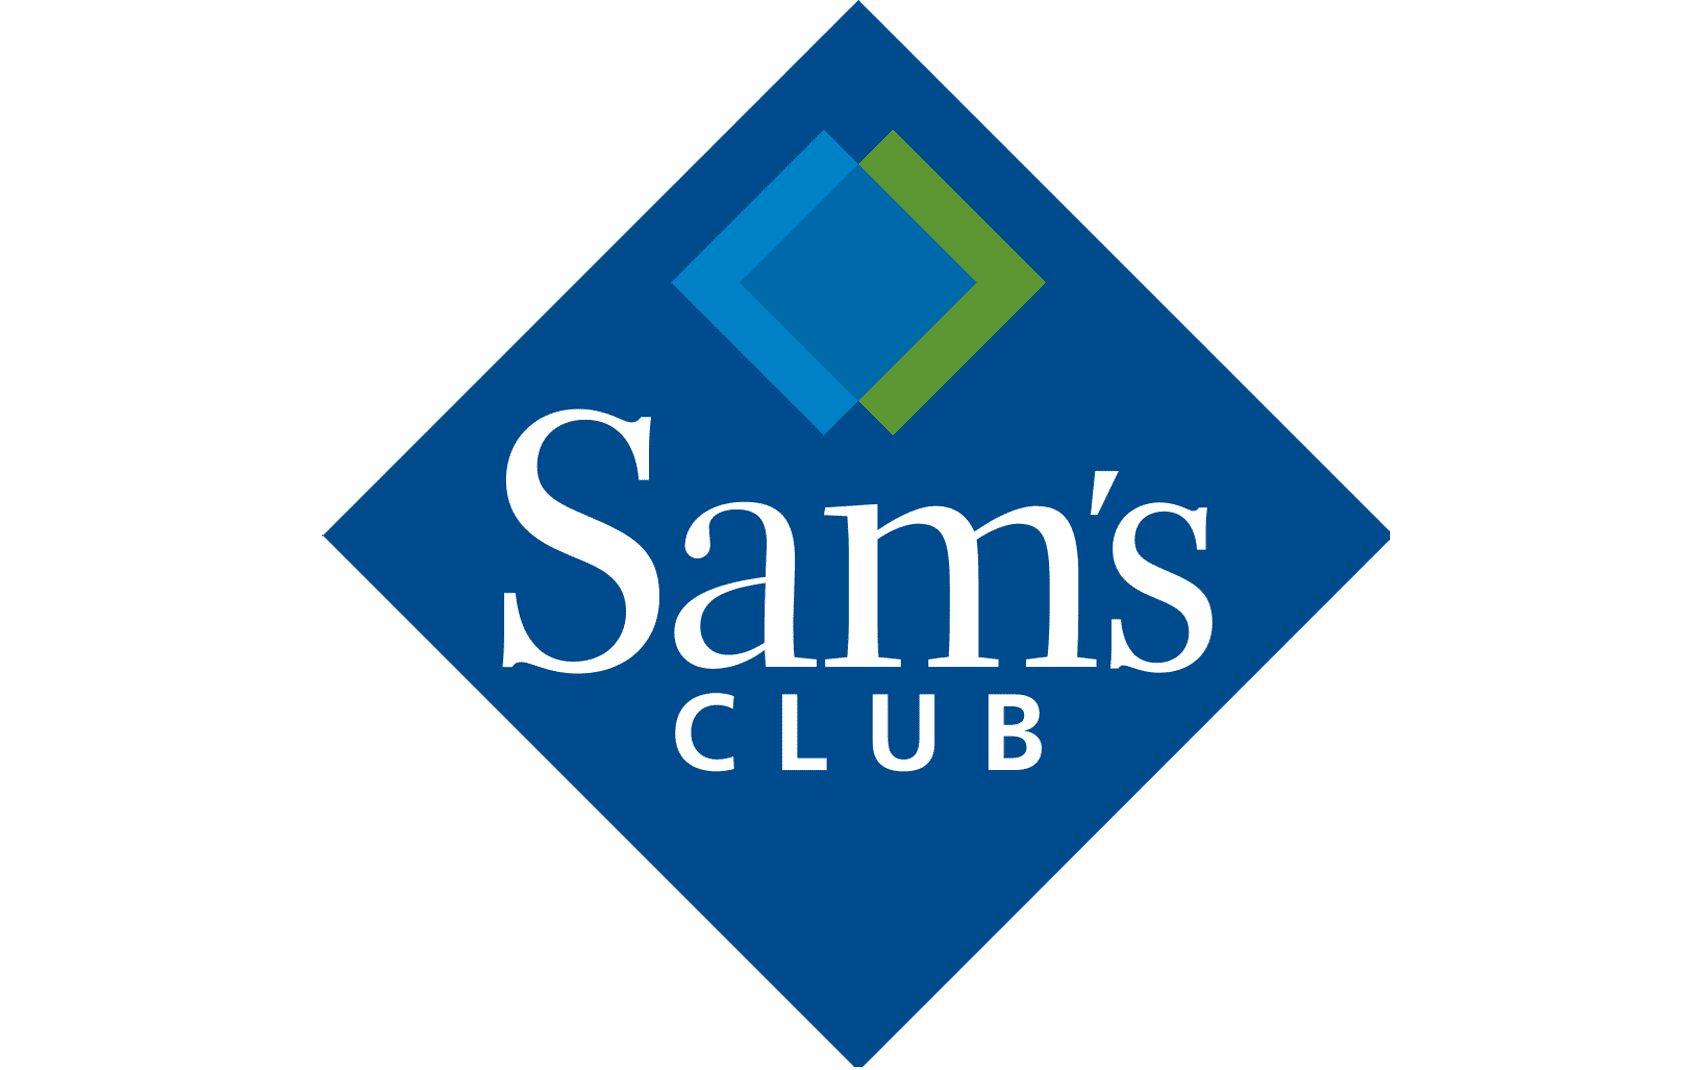 The Official QB Thread The Time is Howell! to Sam's Club, The